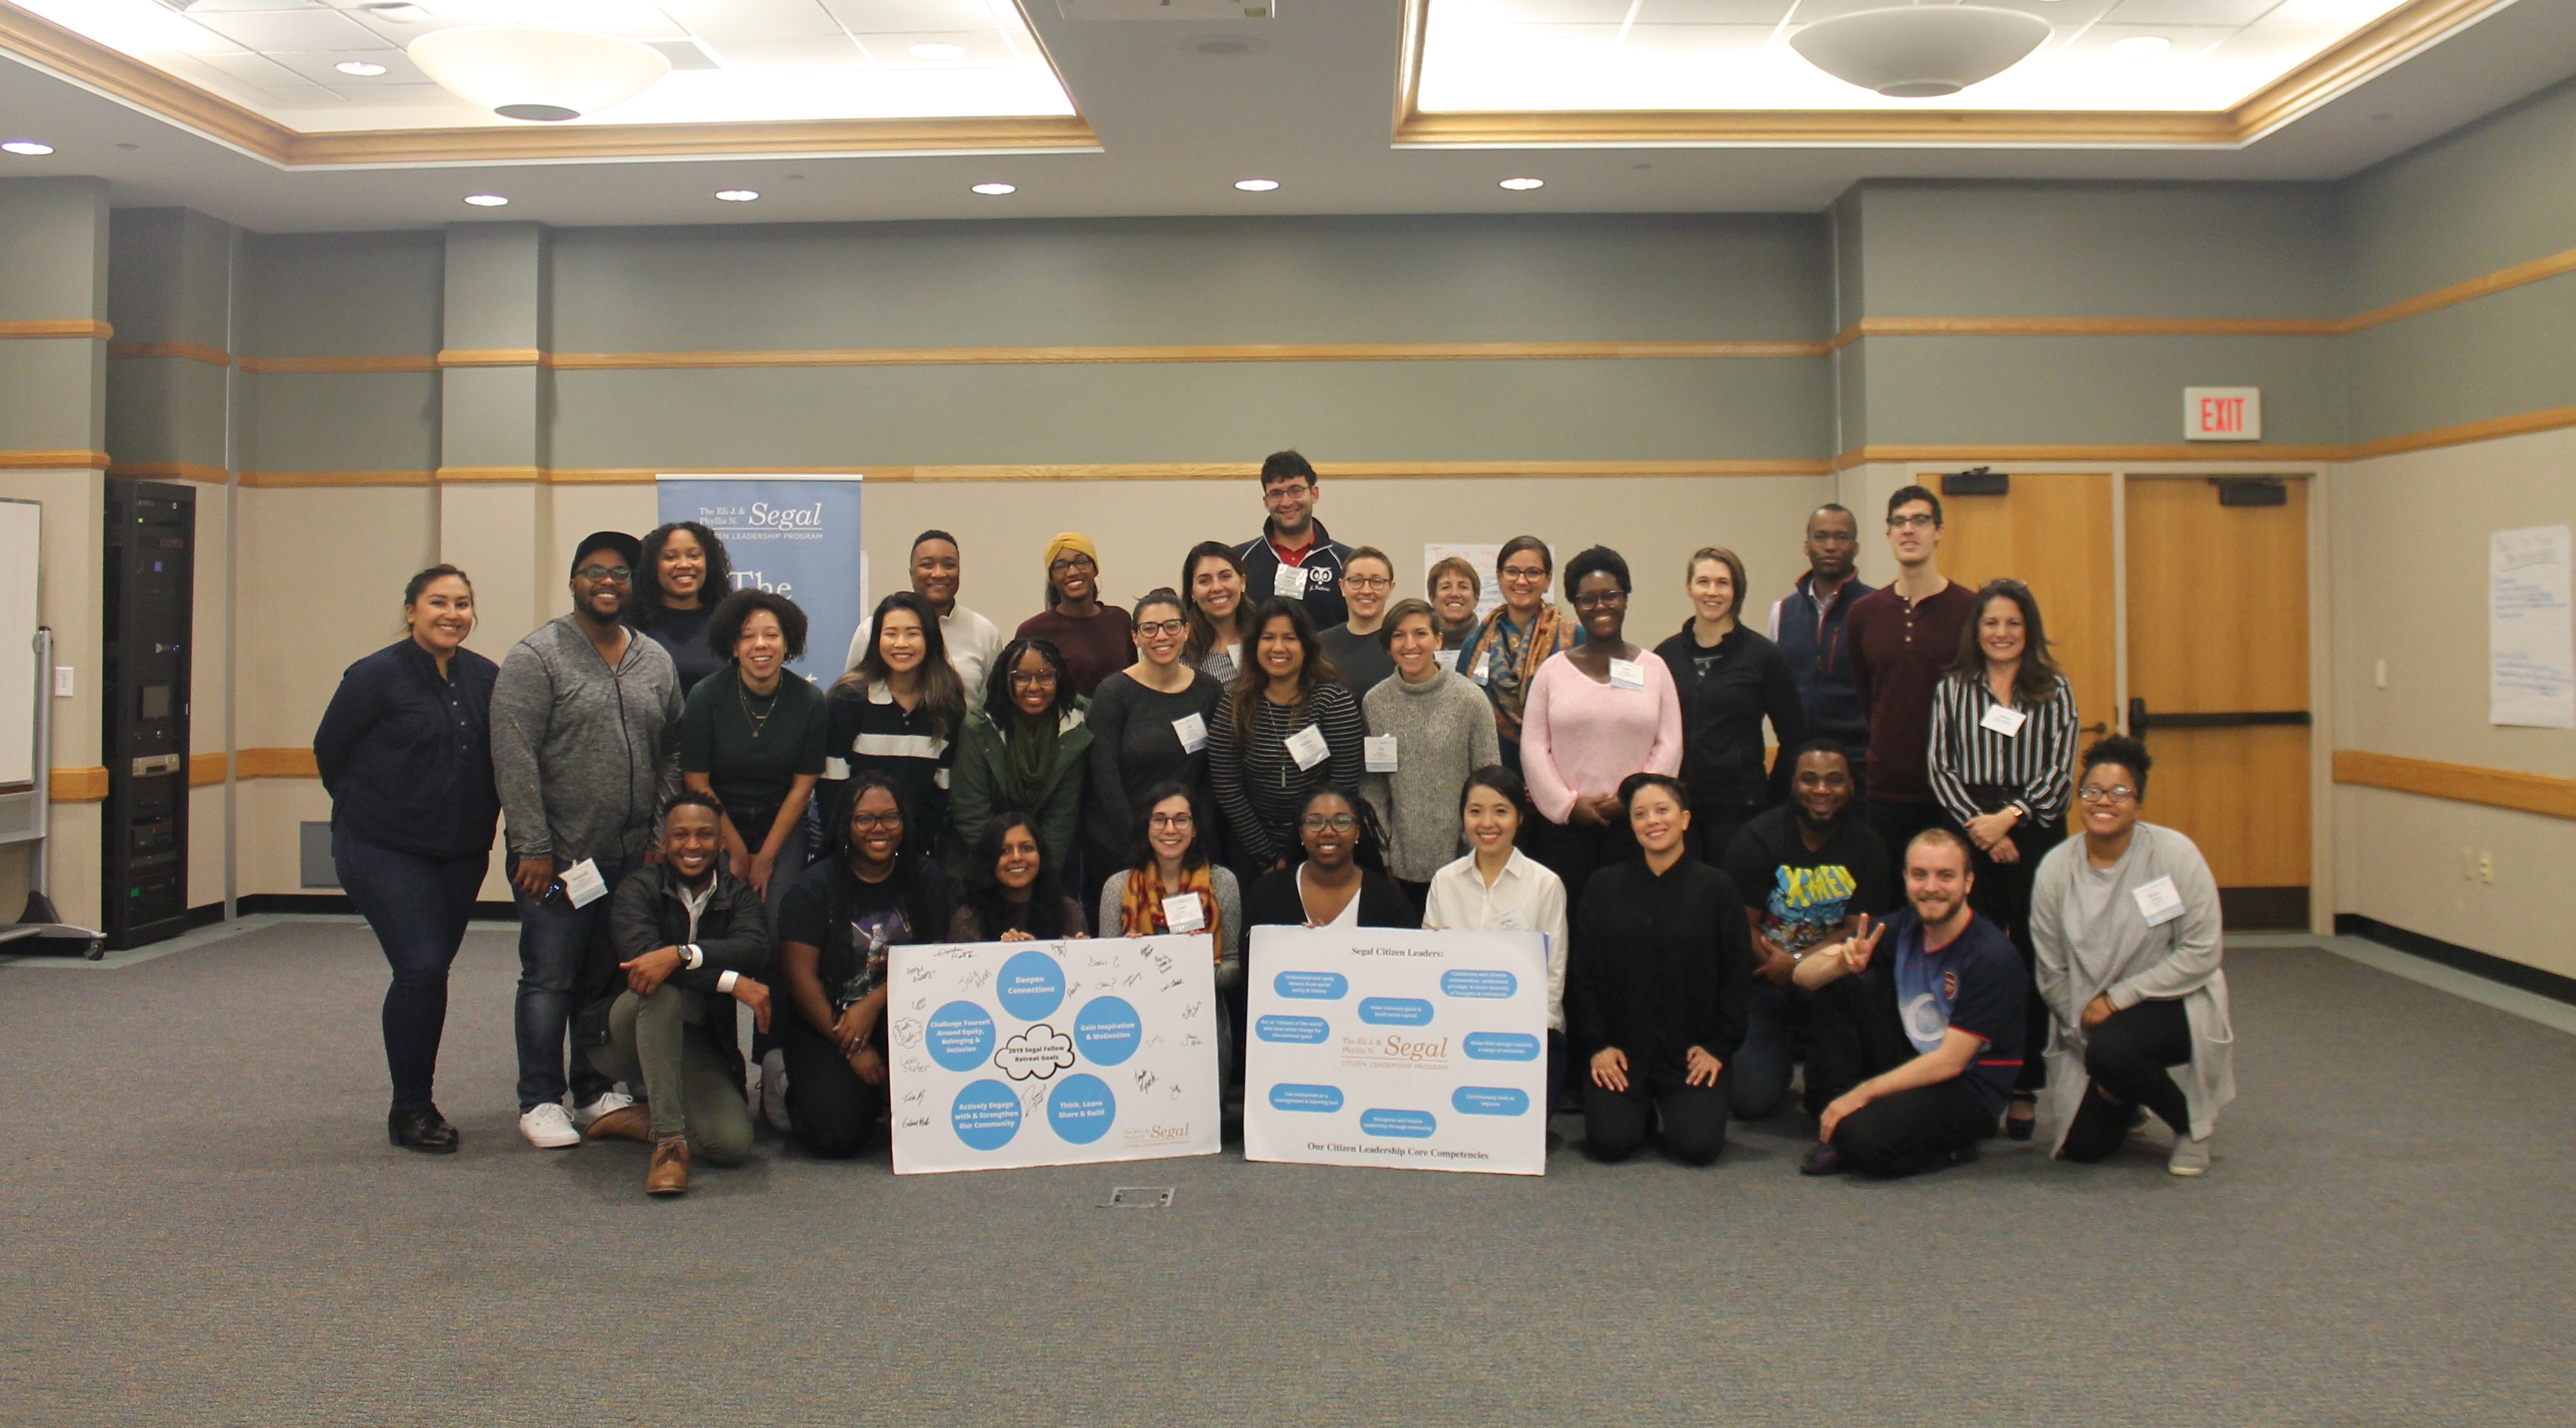 Segal Fellows posing for group photo with retreat goals and welcome board at Segal Fellow Retreat